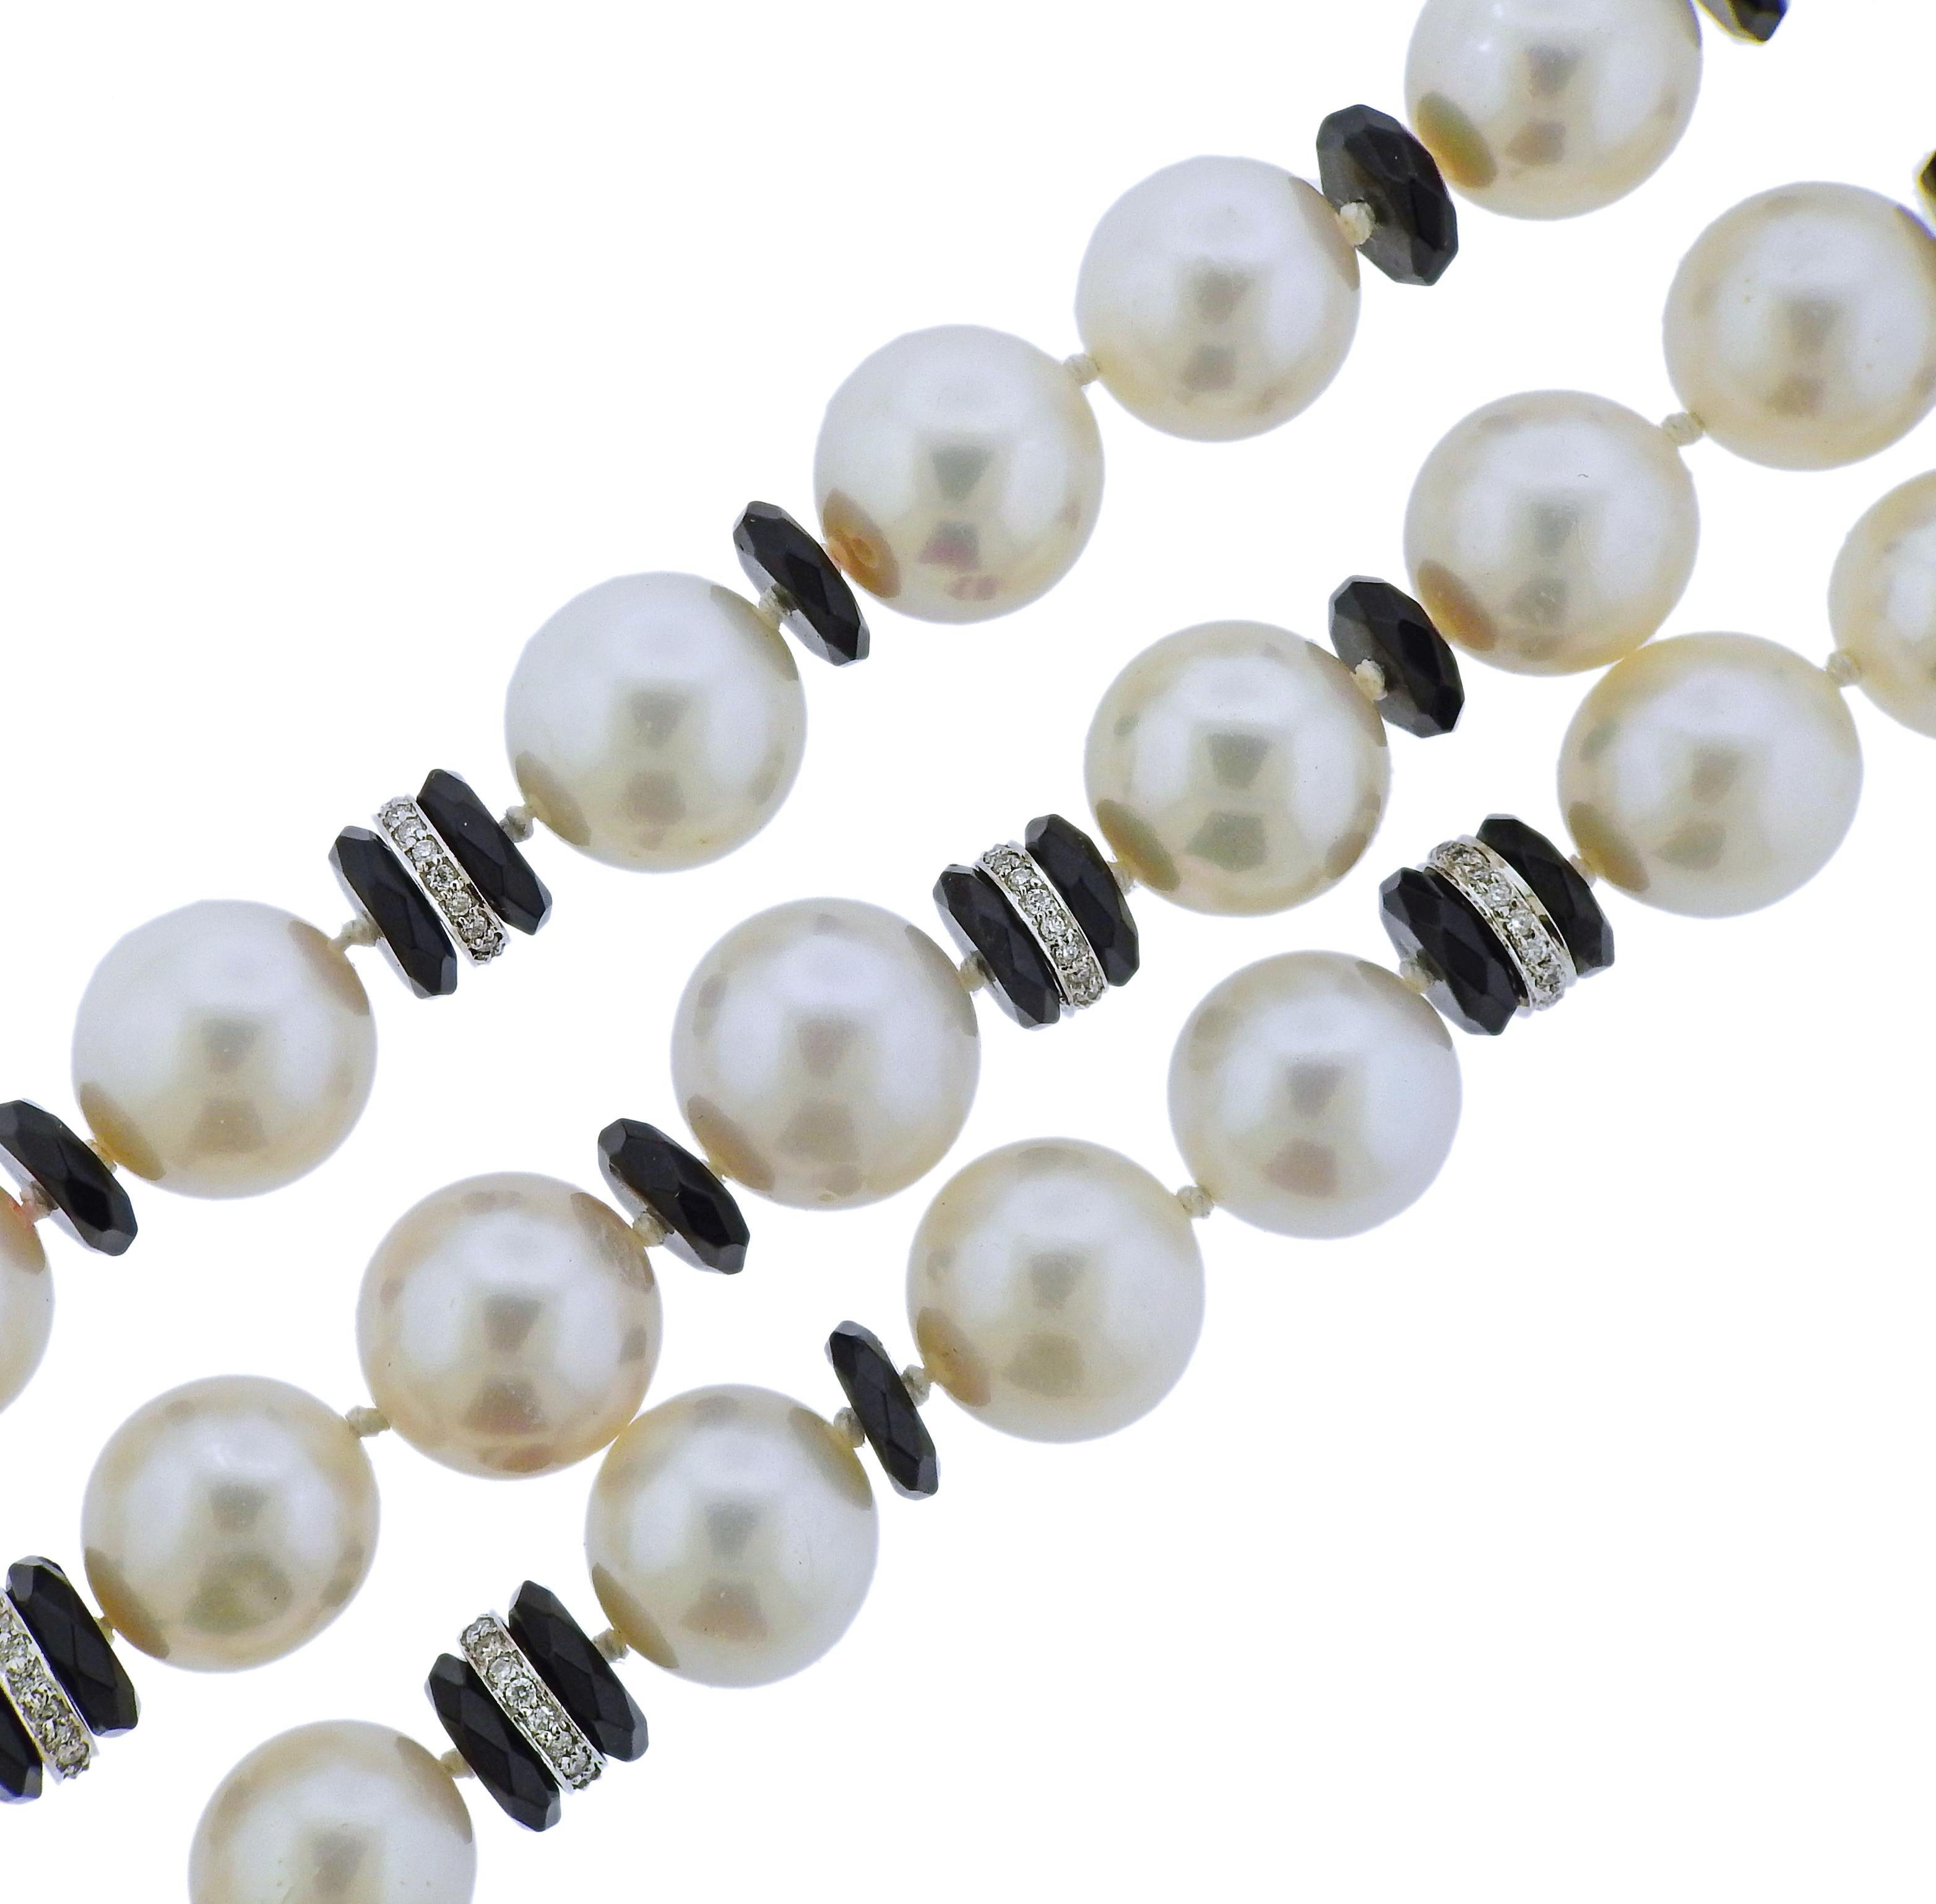 18k gold multi strand bracelet by Seaman Schepps, featuring onyx, approx. 0.80ctw in G/VS diamonds and 11 - 13mm pearls. Retail $19250. Bracelet is 8